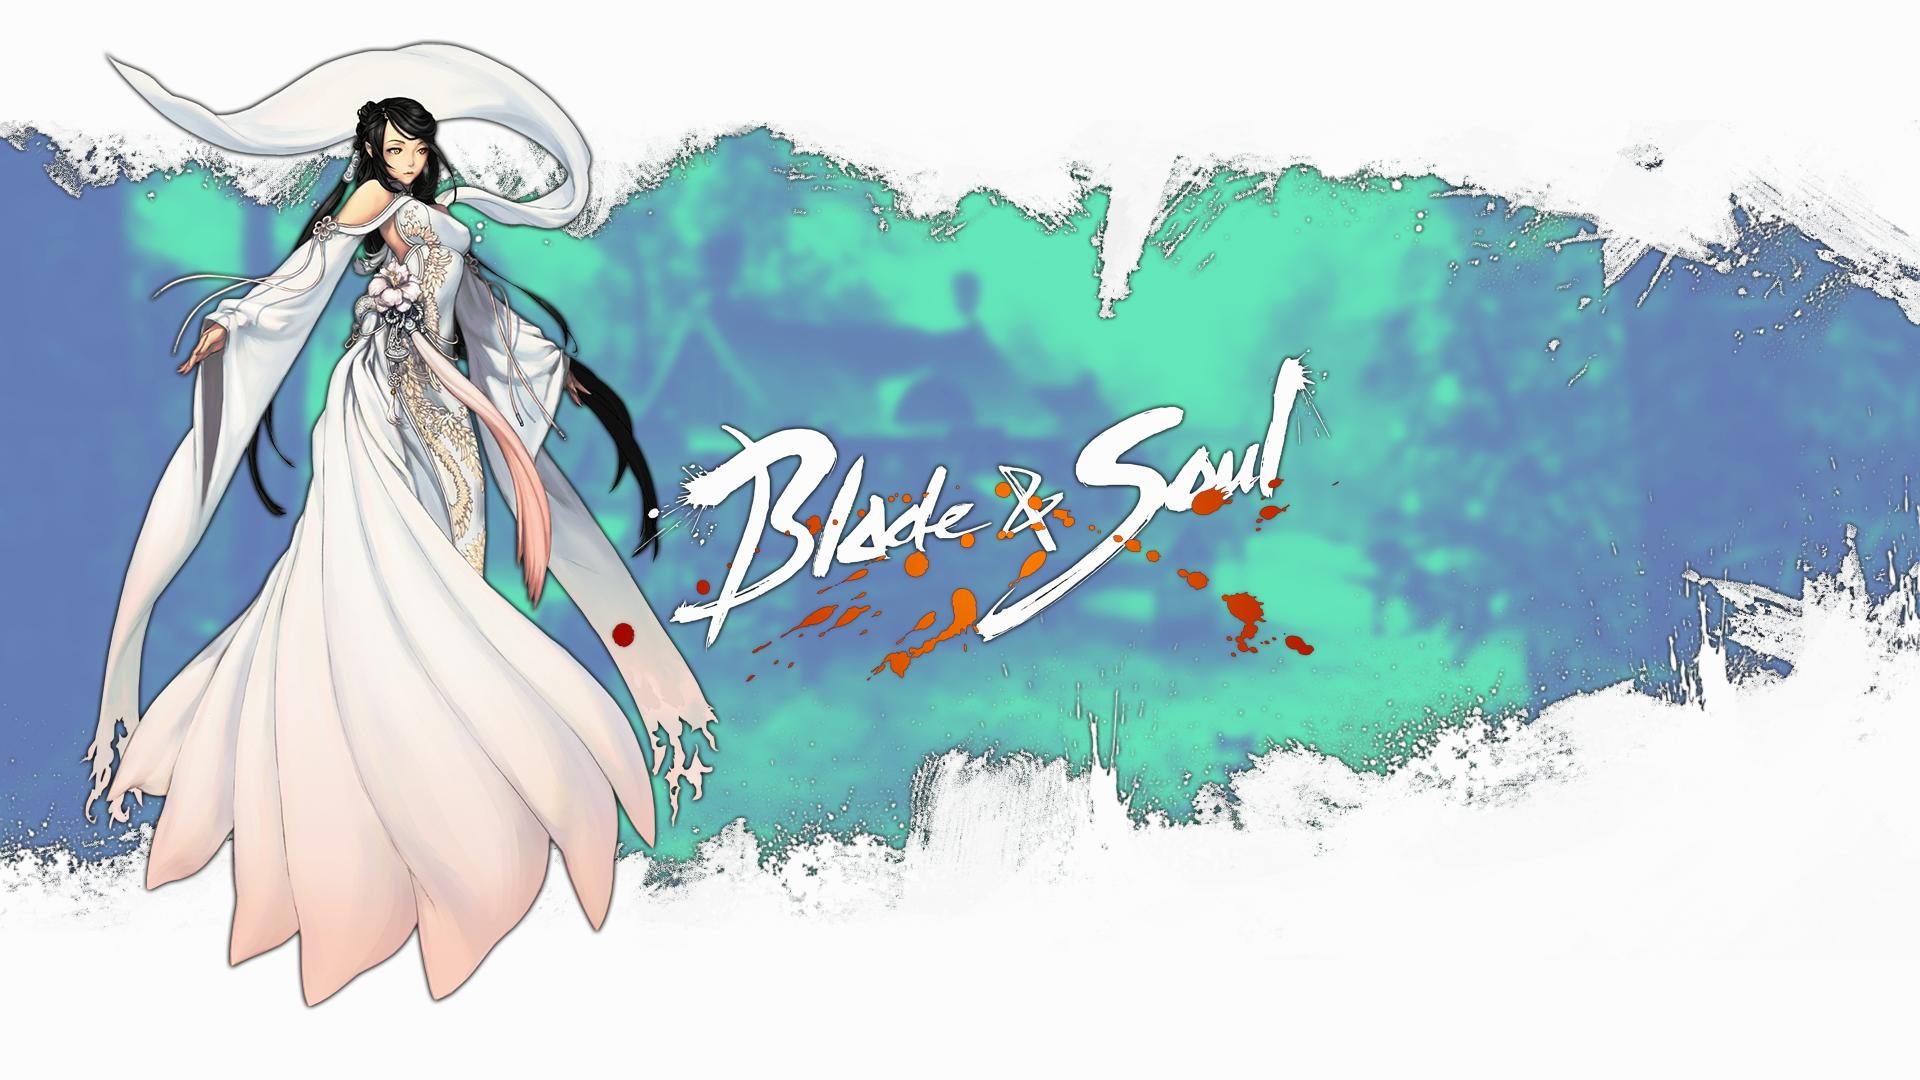 Wallpaper.wiki Image of Blade and Soul PIC